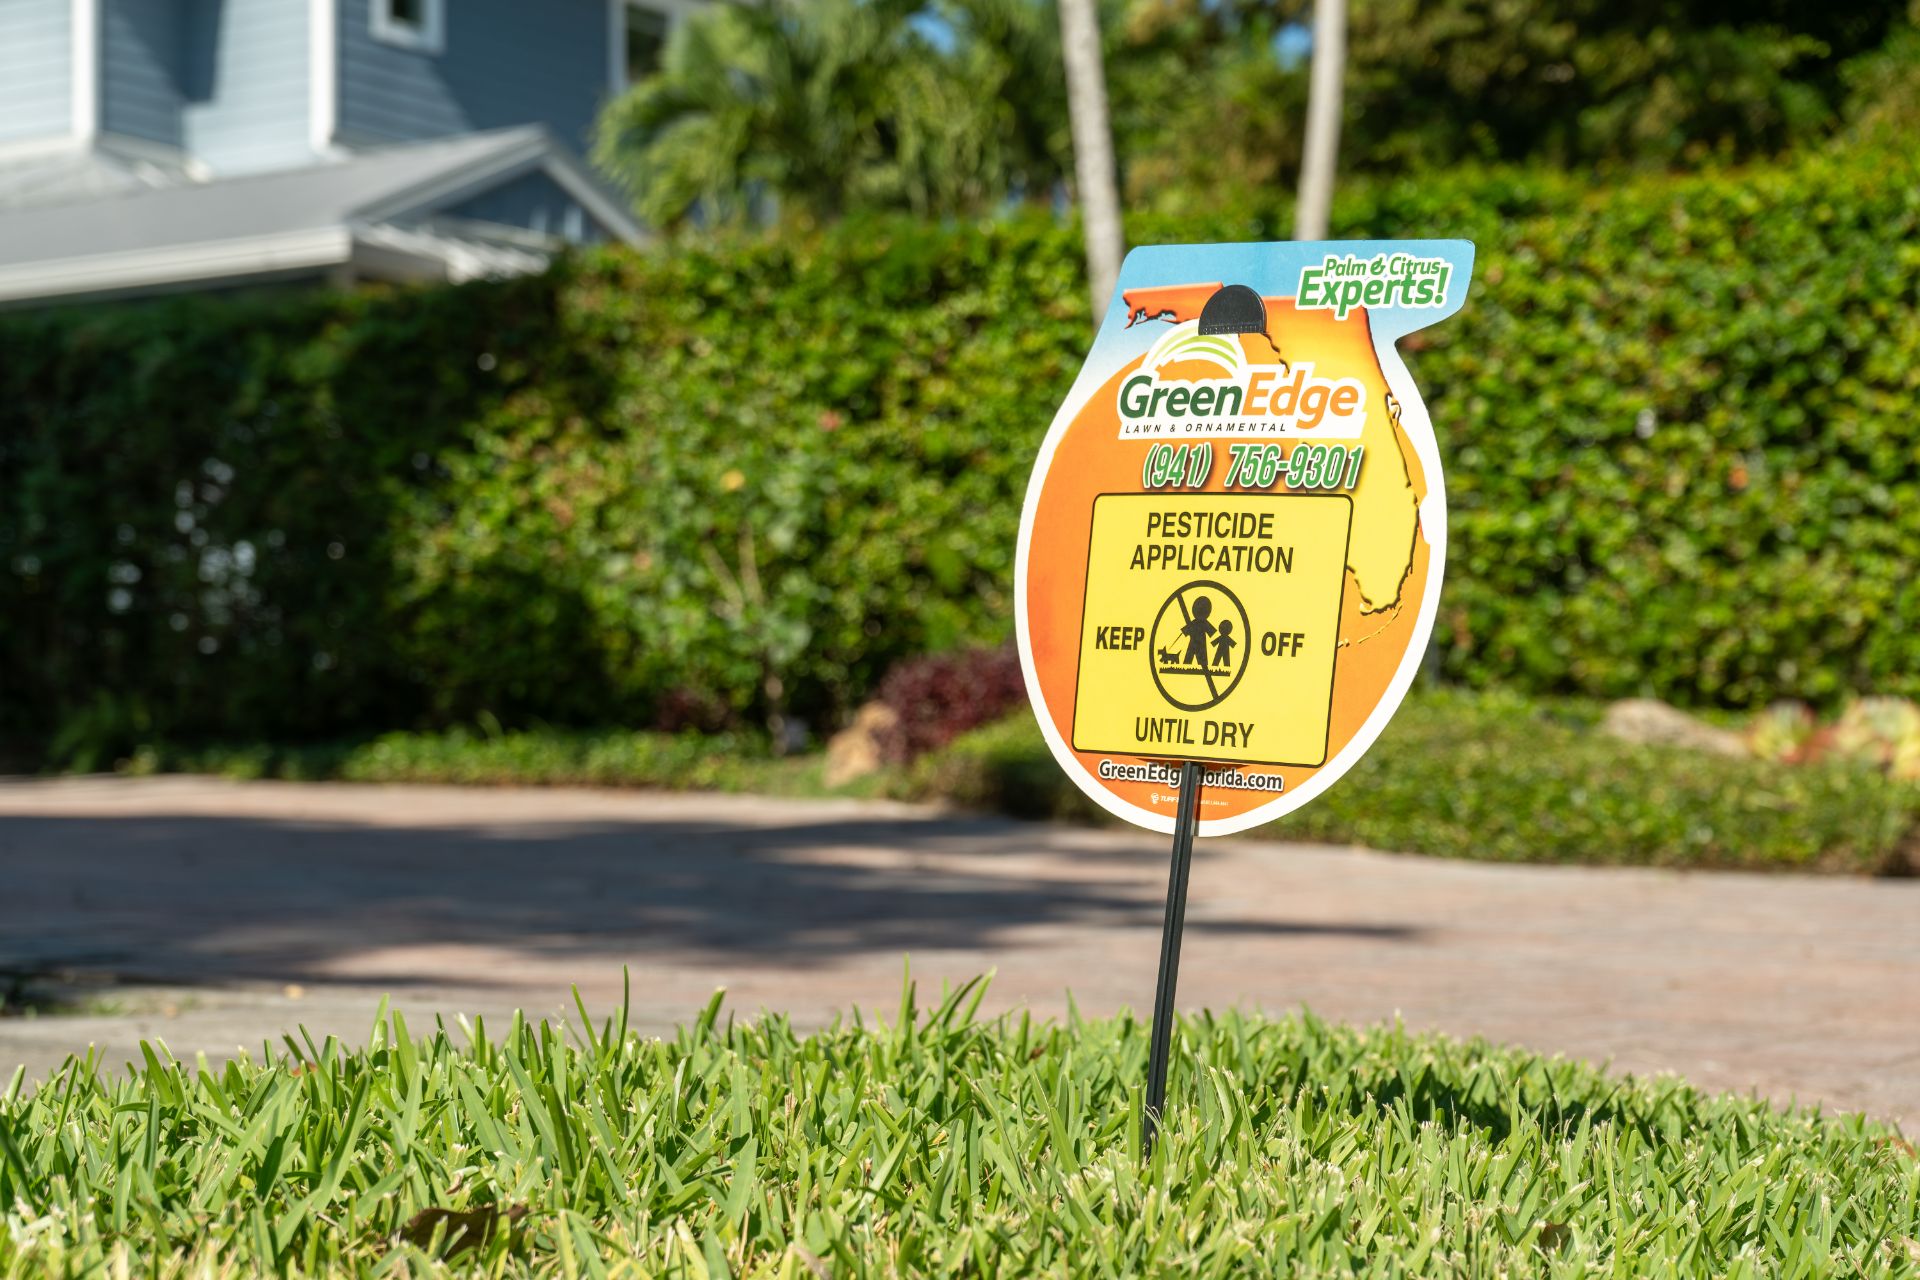 A sign placed in the grass by GreenEdge indicating that a pesticide has been applied. The sign states "Keep off until dry" as a safety precaution. We prioritize the well-being of our clients and adhere to proper application procedures to ensure effective and safe pesticide use. Trust GreenEdge for responsible and transparent practices in pest control services.